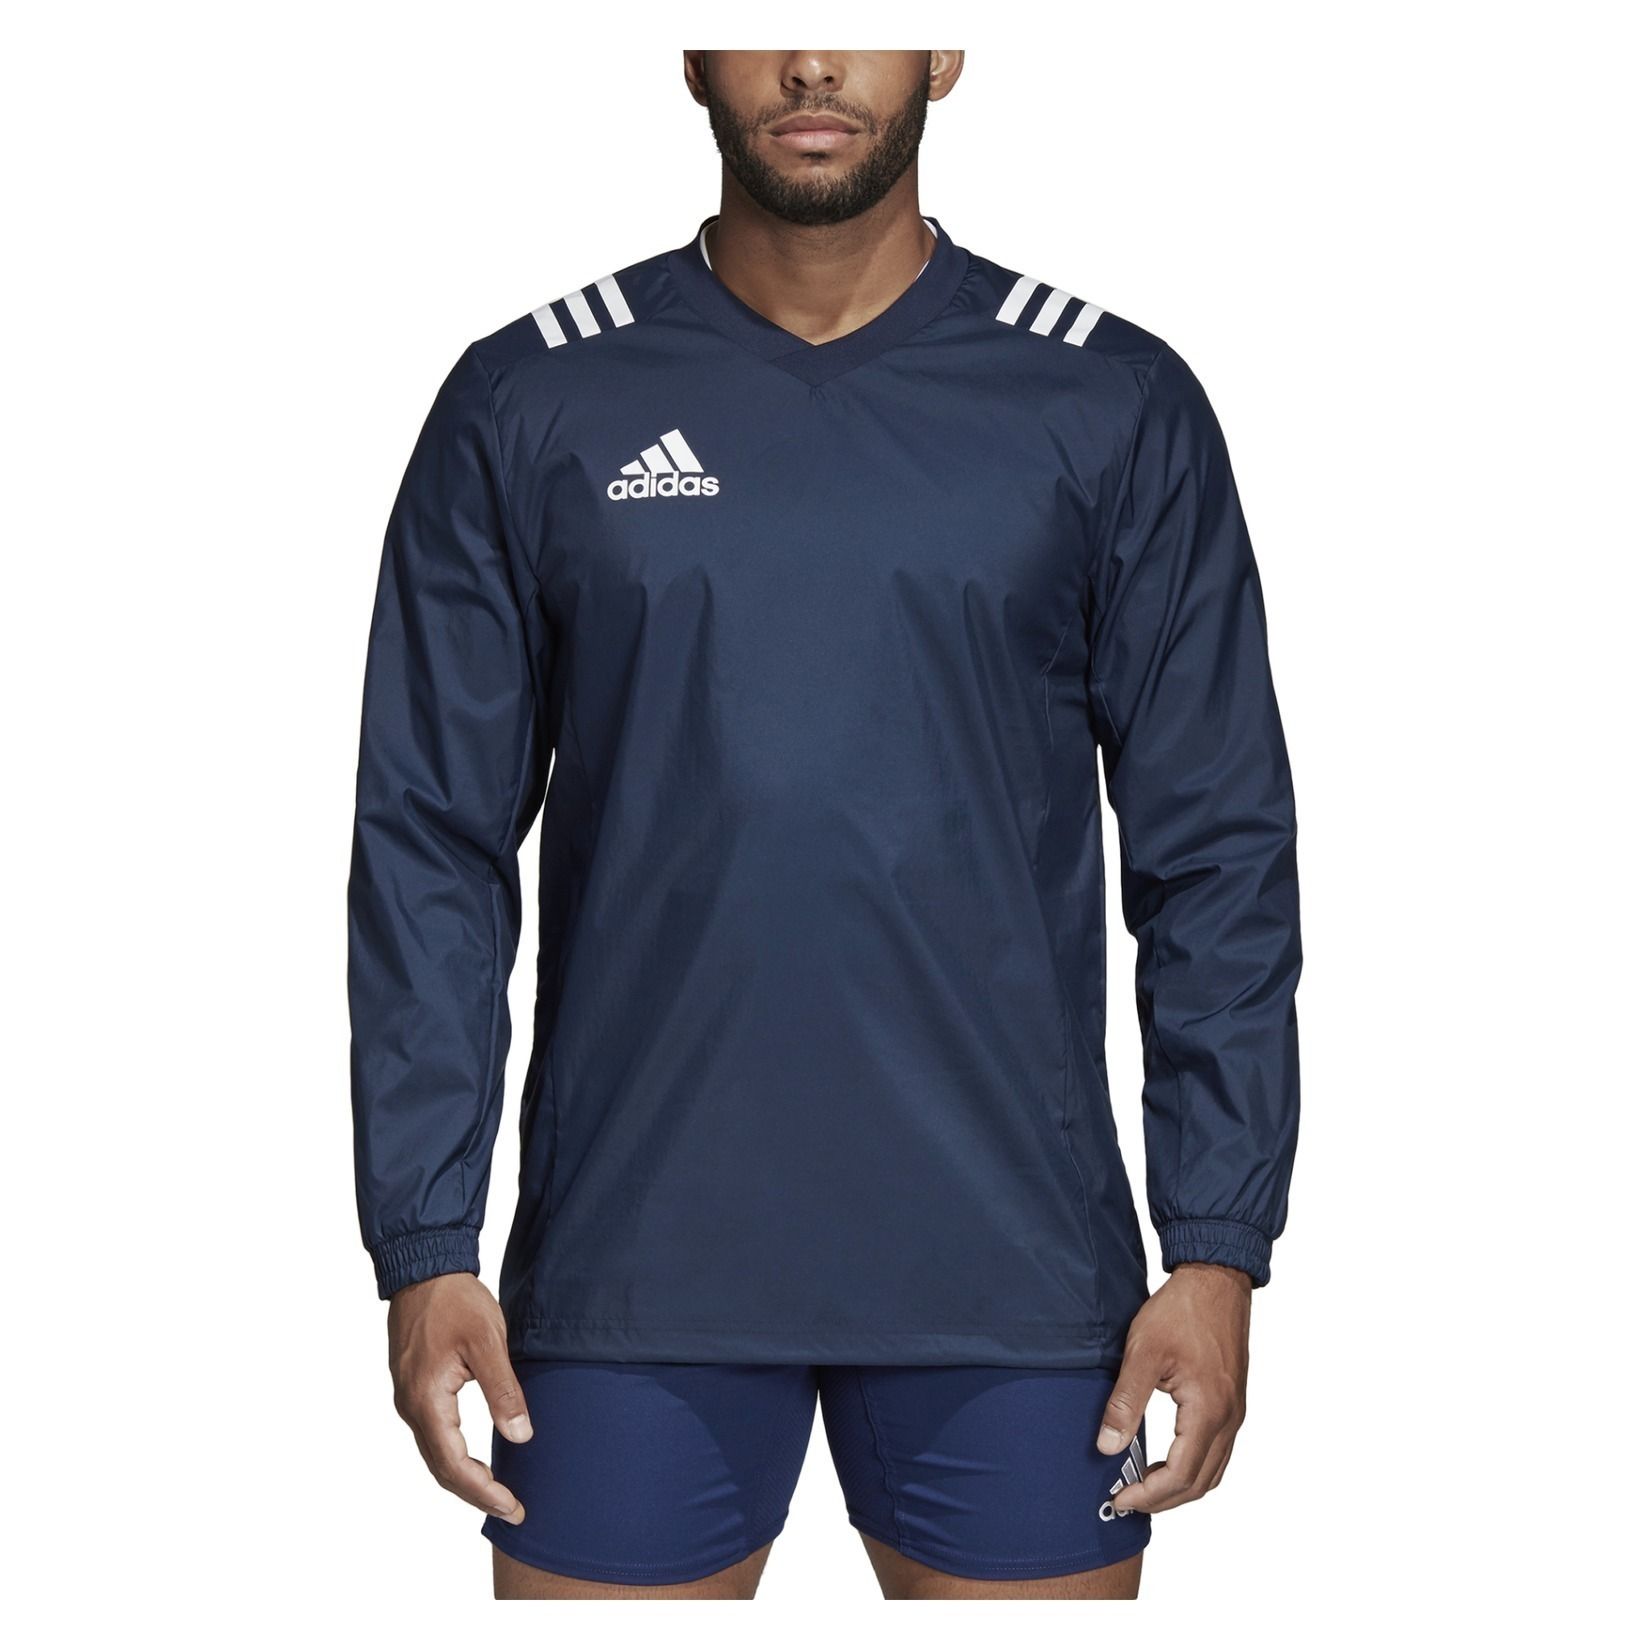 adidas rugby training top